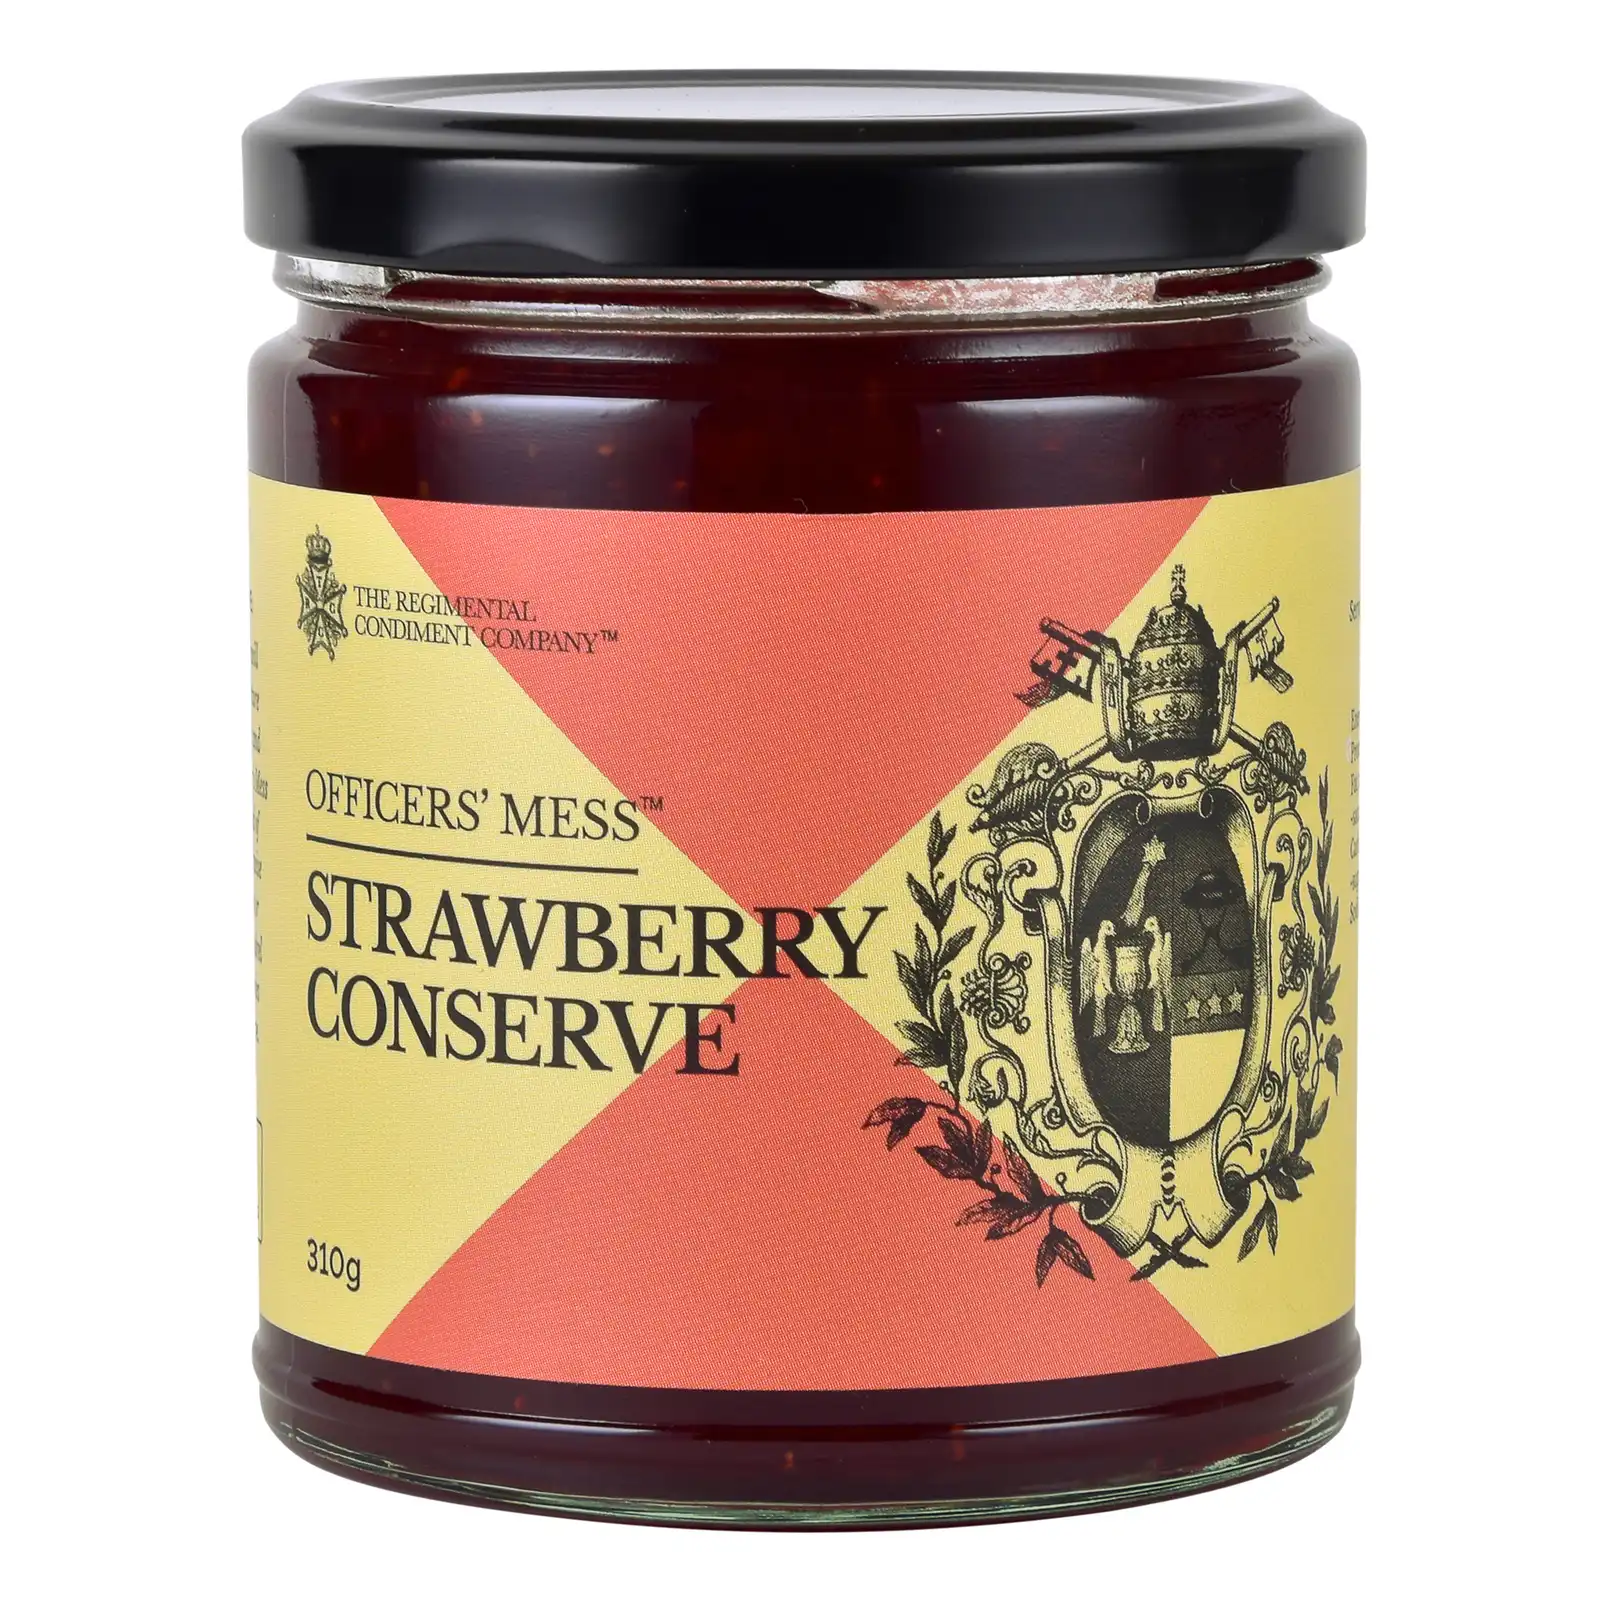 TRCC Officers' Mess Strawberry Conserve 310g